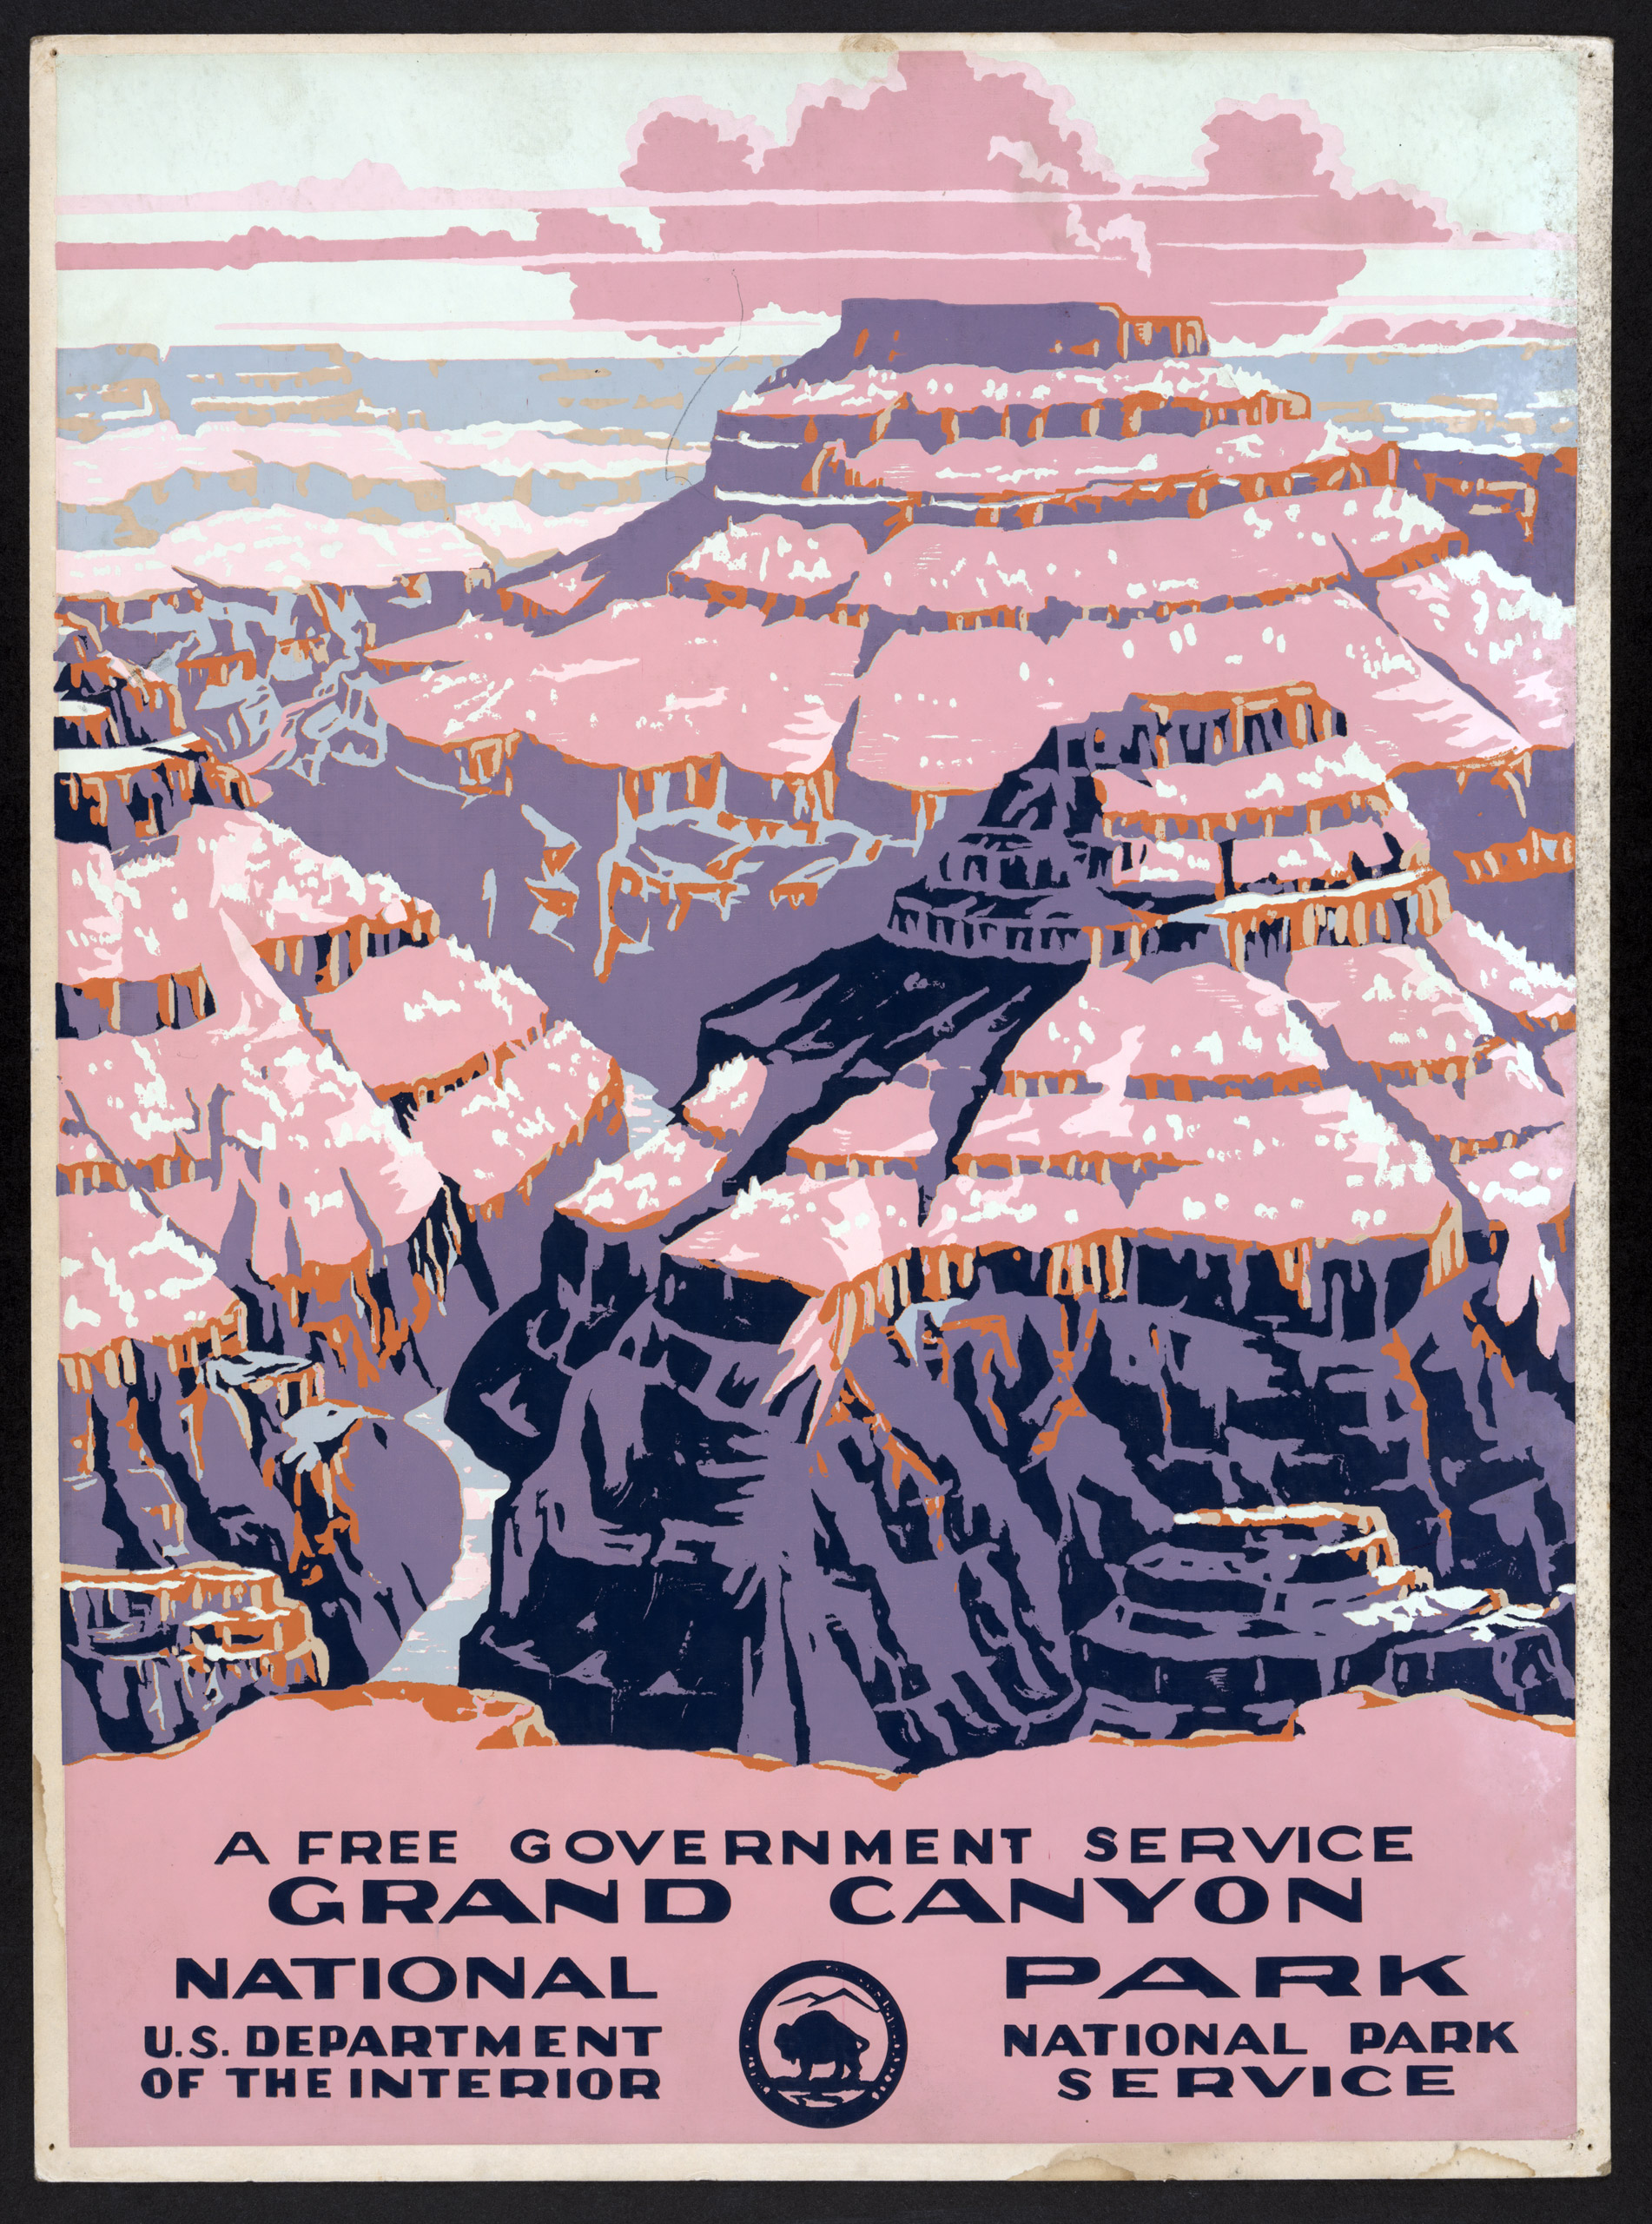 WPA National Parks poster from the Library of Congress.